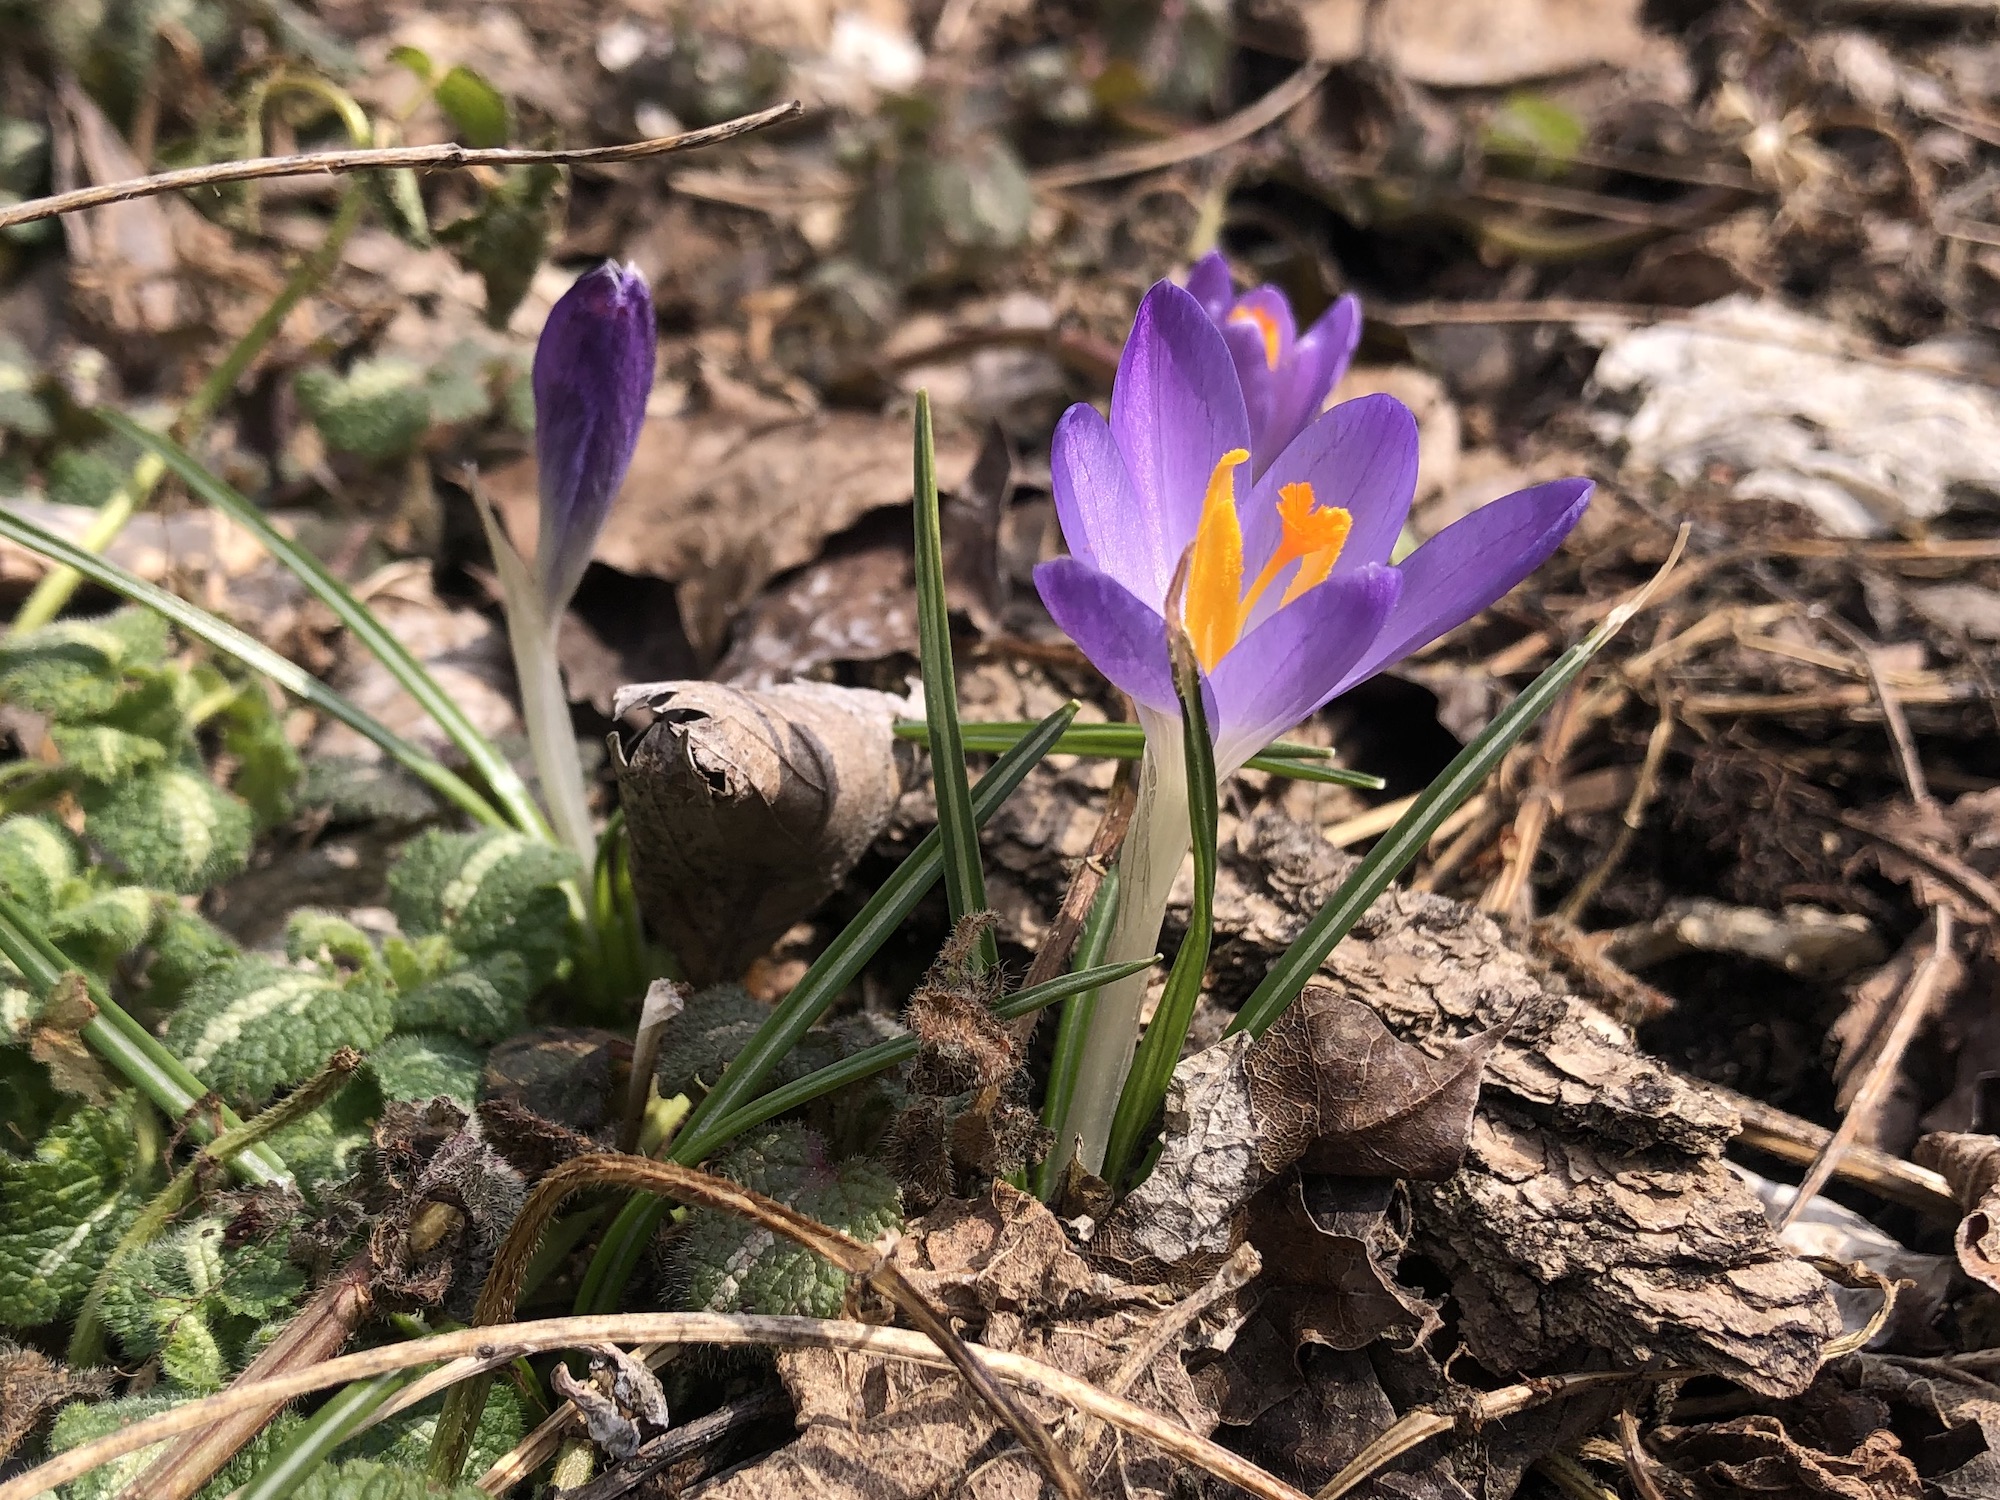 Crocus by Agawa Path in Madison, Wisconsin on March 21, 2023.